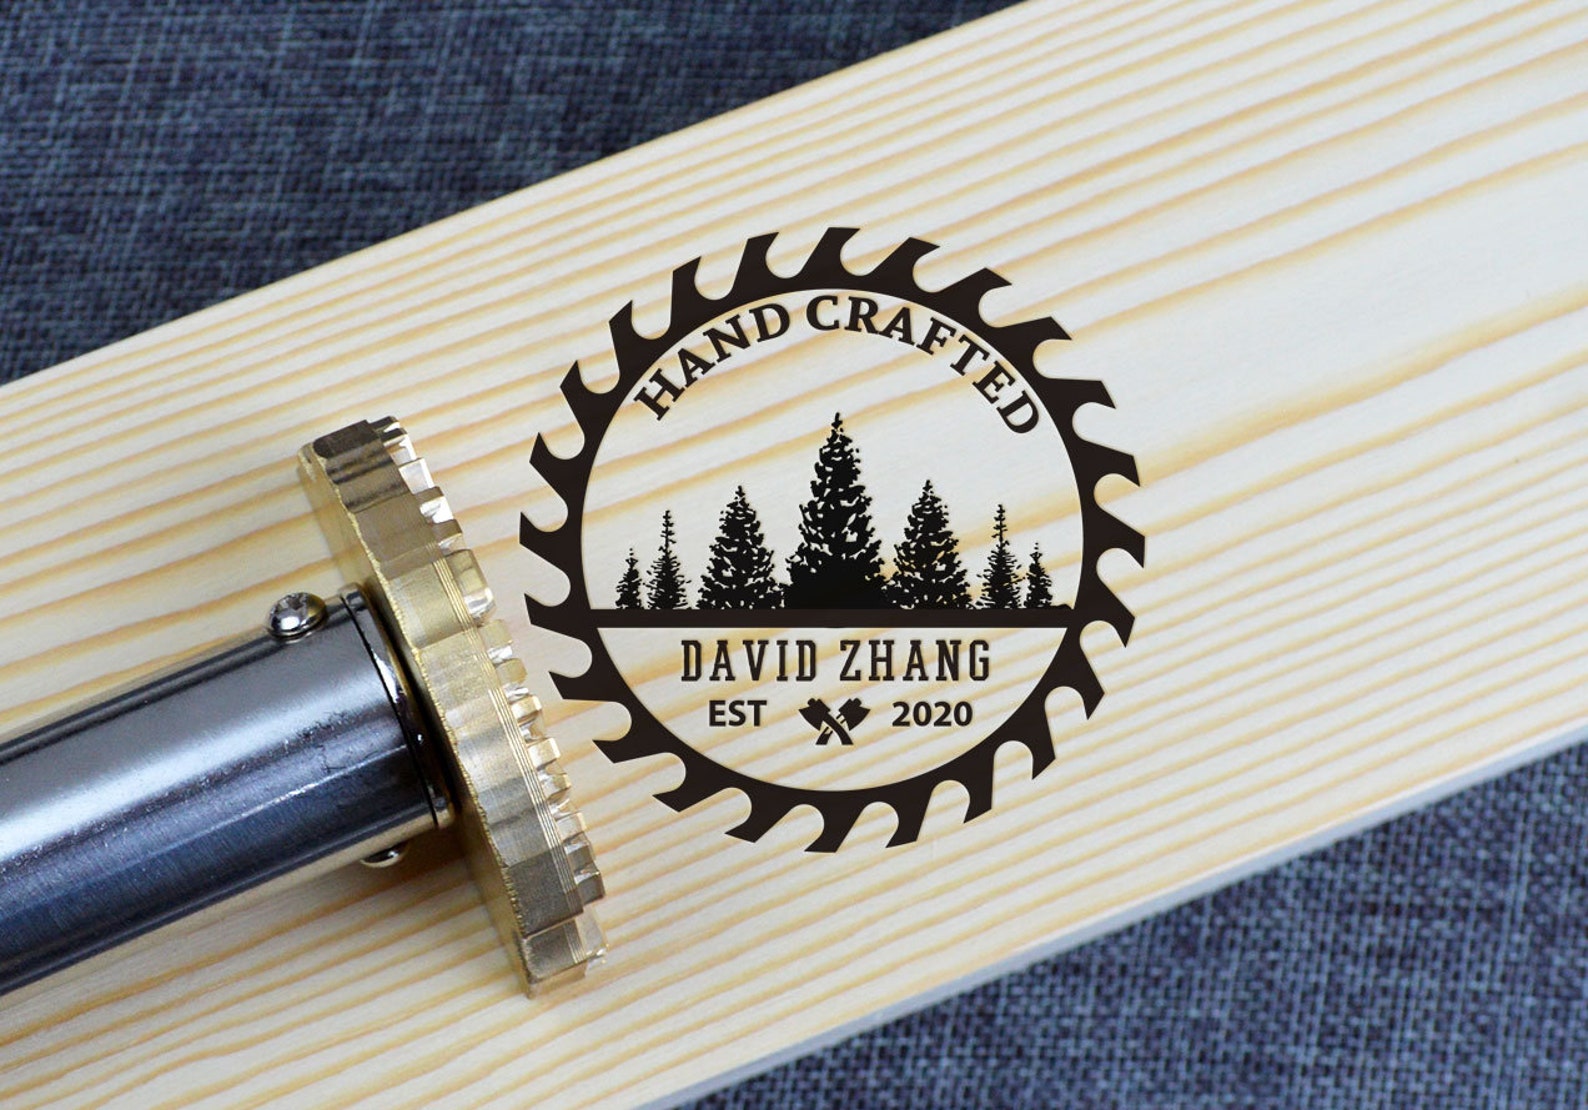 The Precision of Electric Wood Branding Irons in Artisanal Work